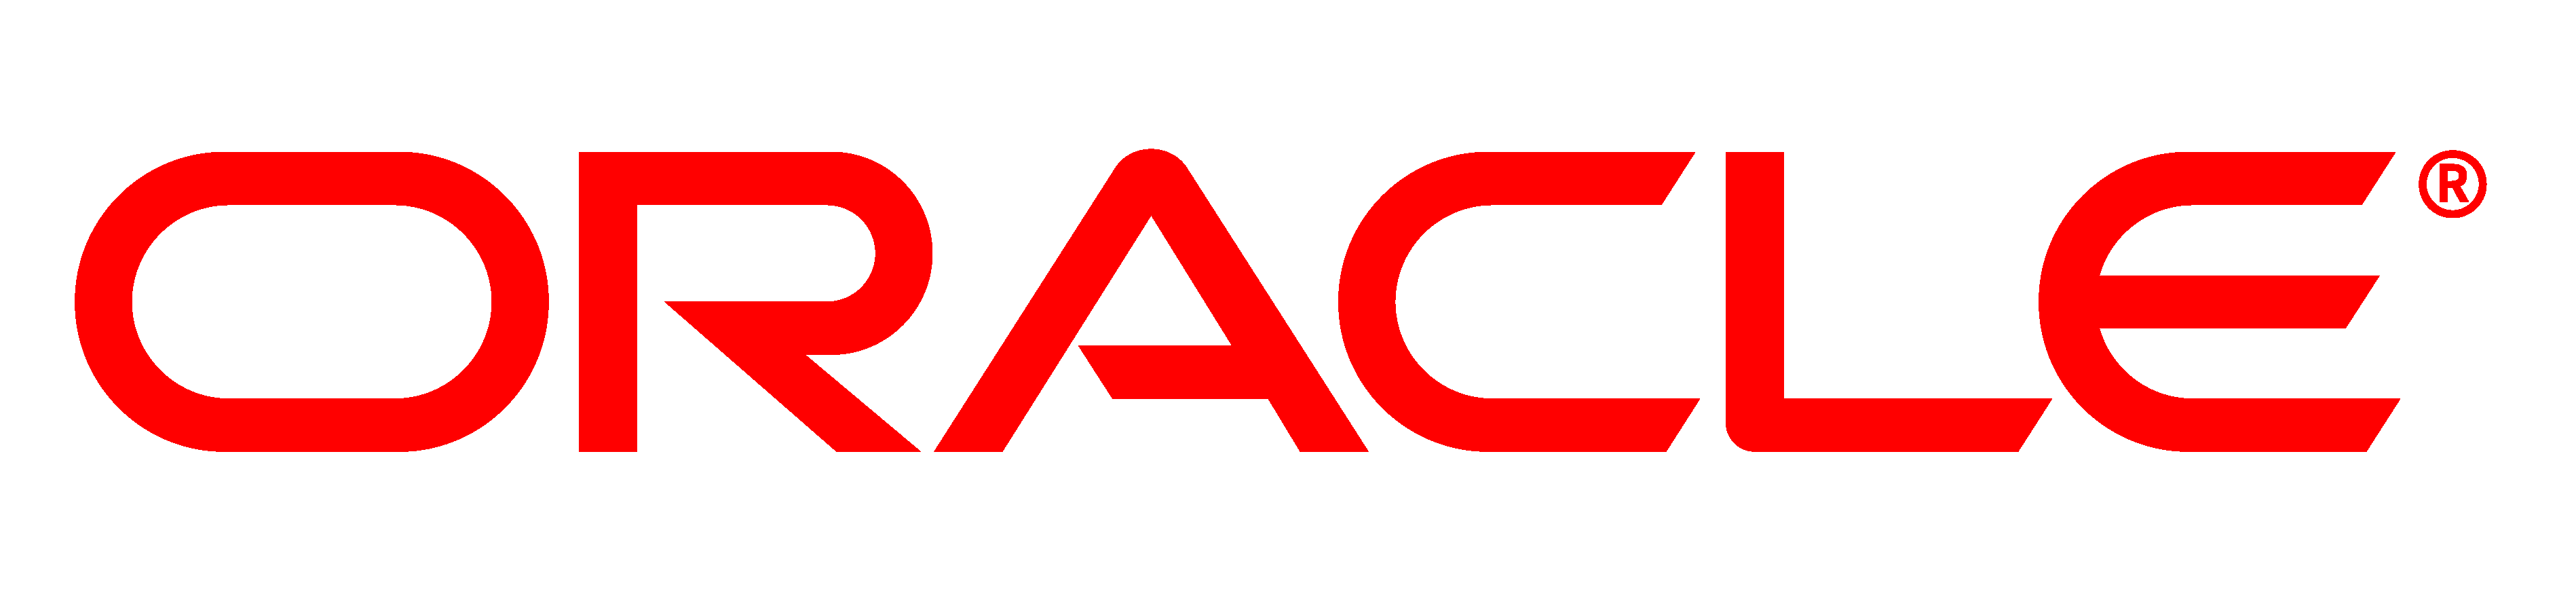 Oracle Logo Png Download - 51